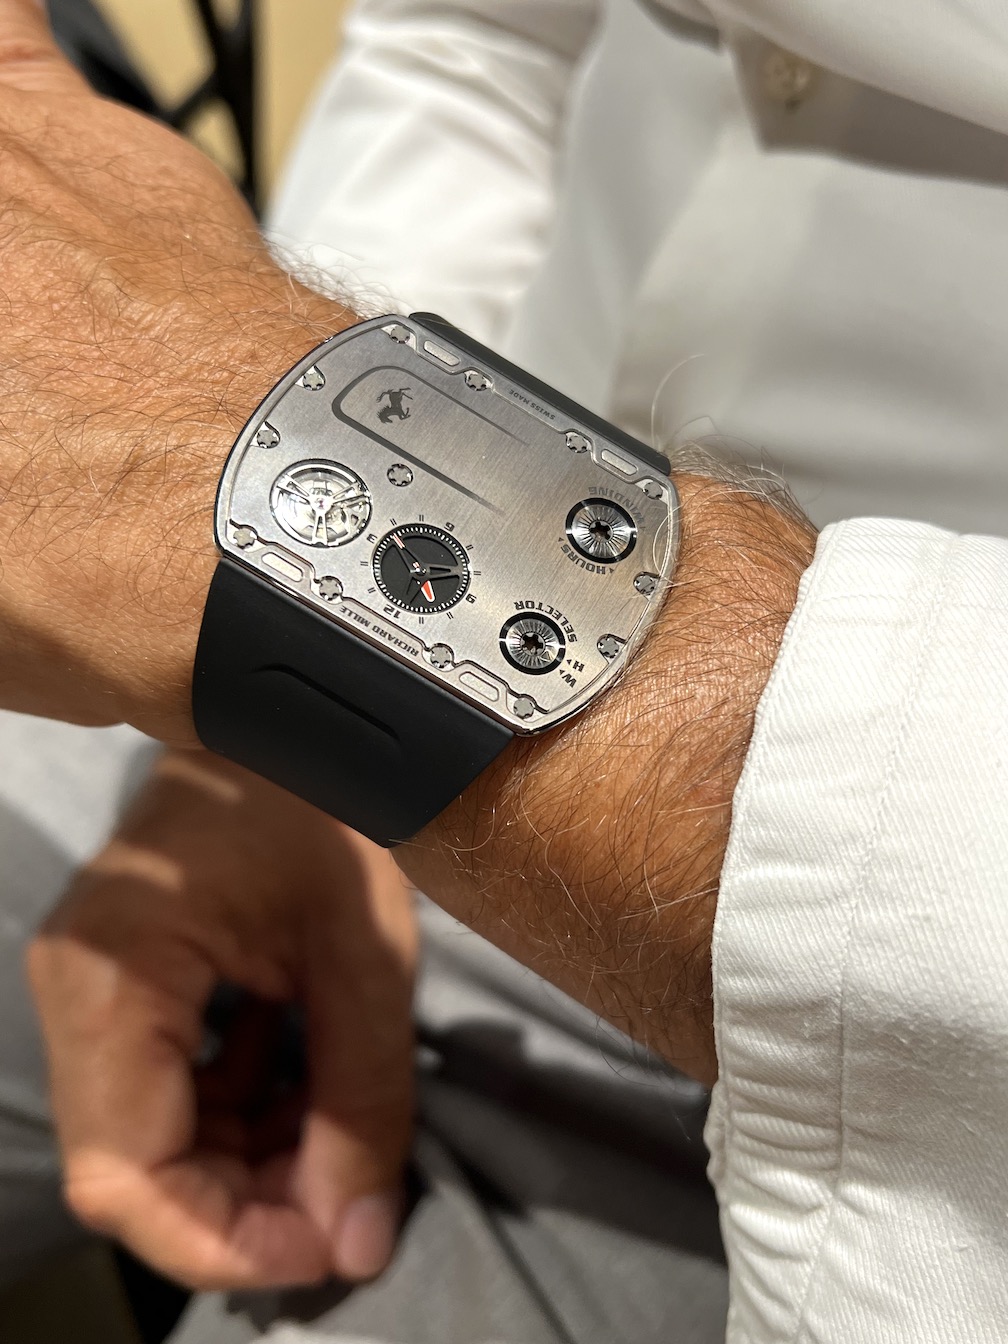 World Record Ultra-Thin Richard Mille RM-UP 01 watch